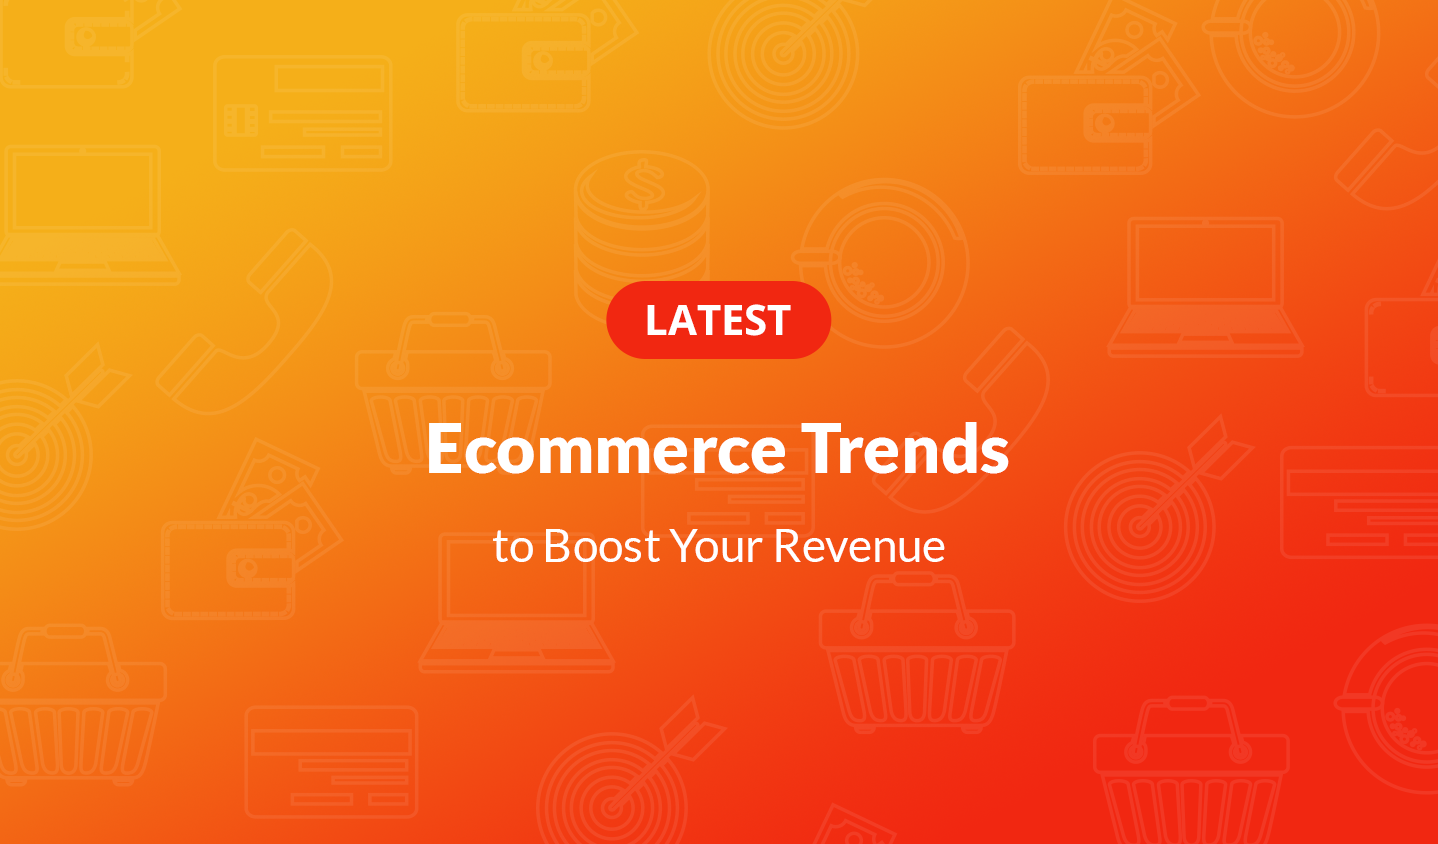 Latest Ecommerce Trends to Boost Your Revenue